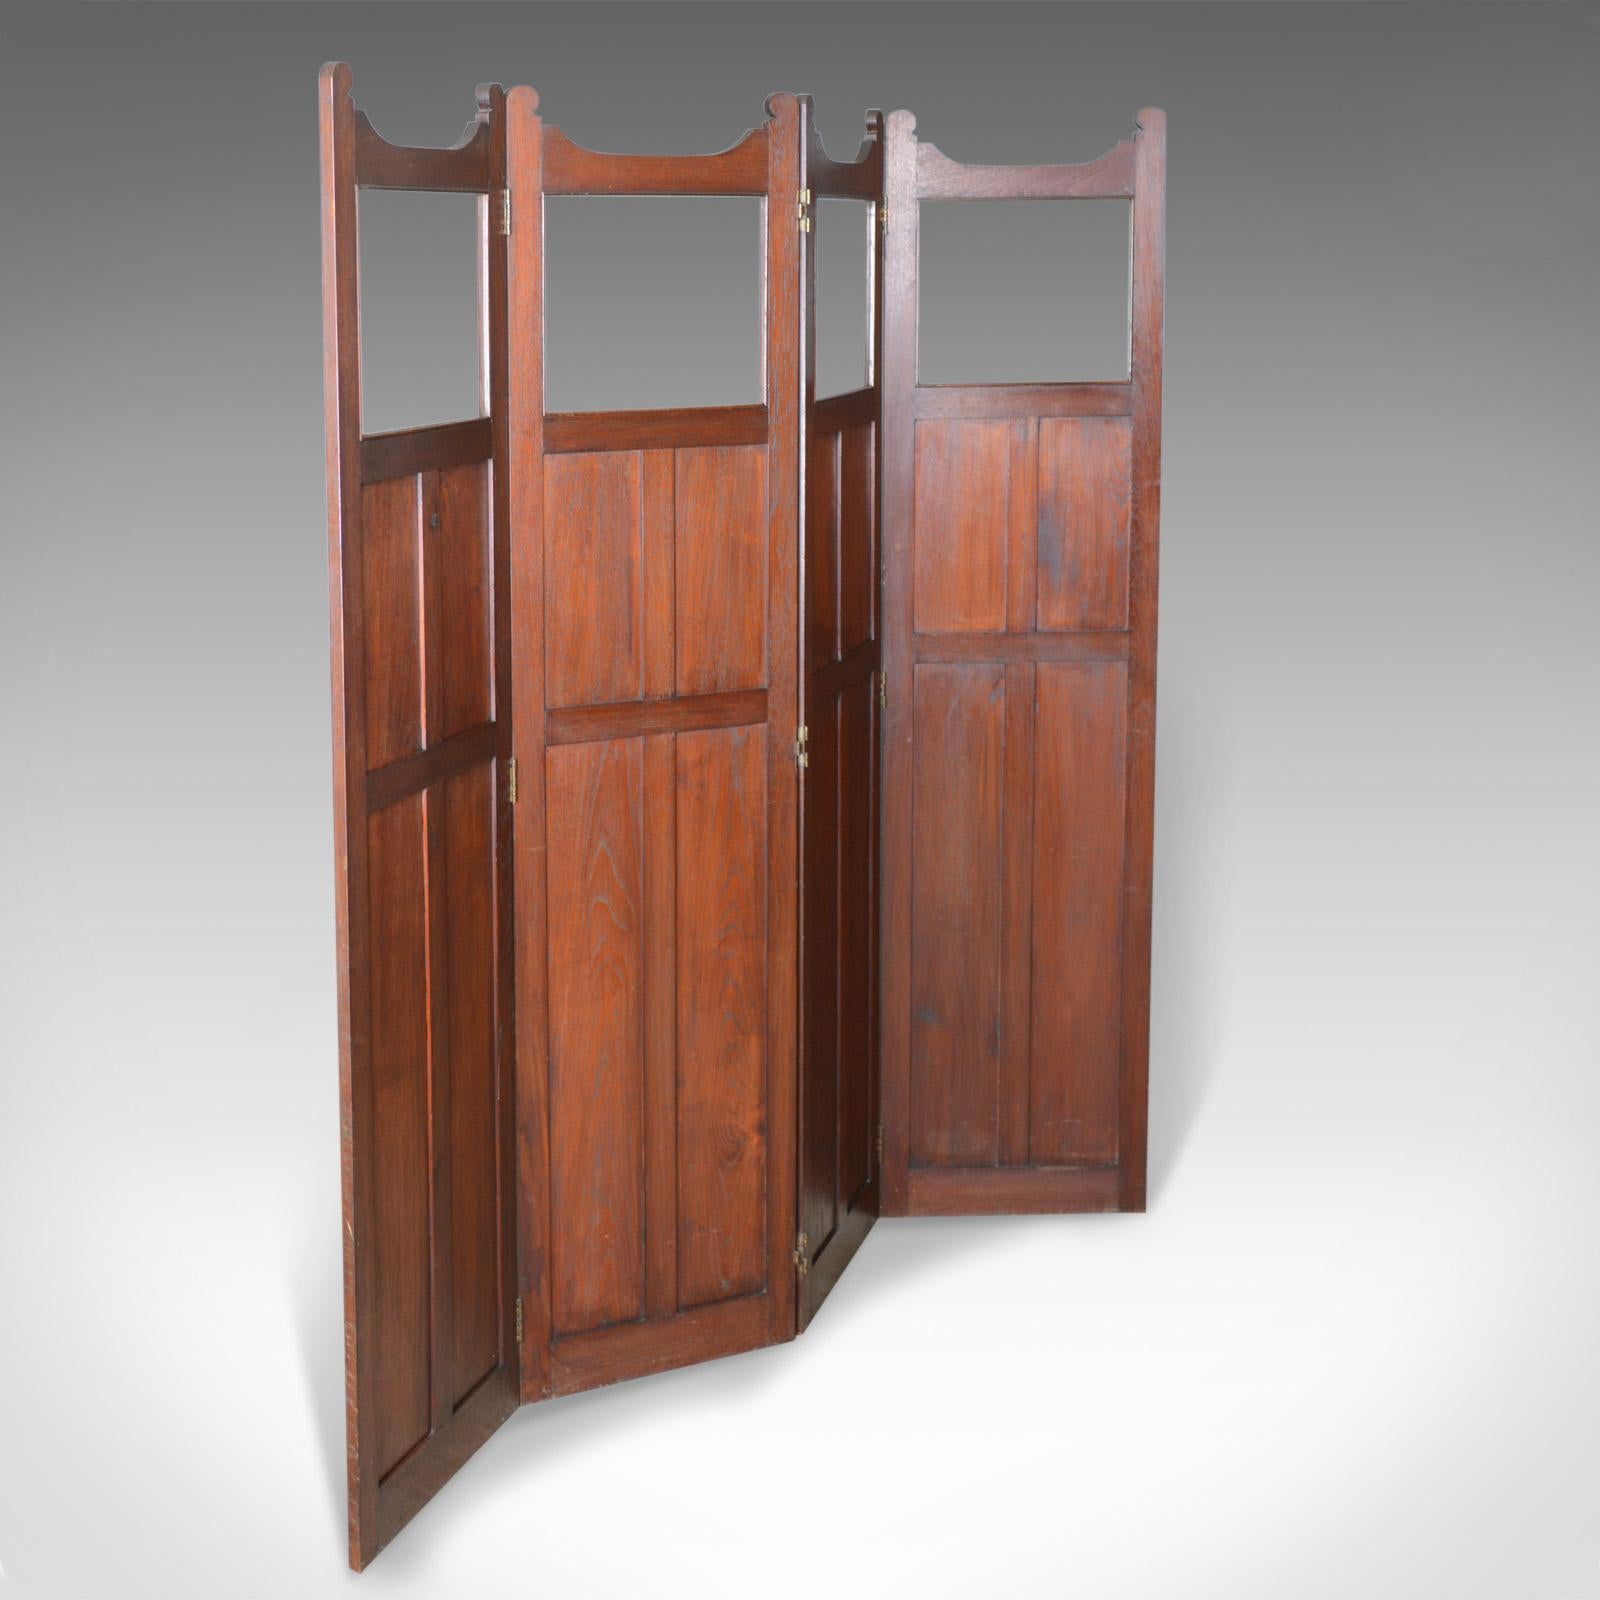 This is an antique folding screen, an English, Edwardian four panel design. A walnut room divider perfect as a photographer's prop, dating to the early 20th century, circa 1910.

Classic walnut panelled design with glazed apertures to the